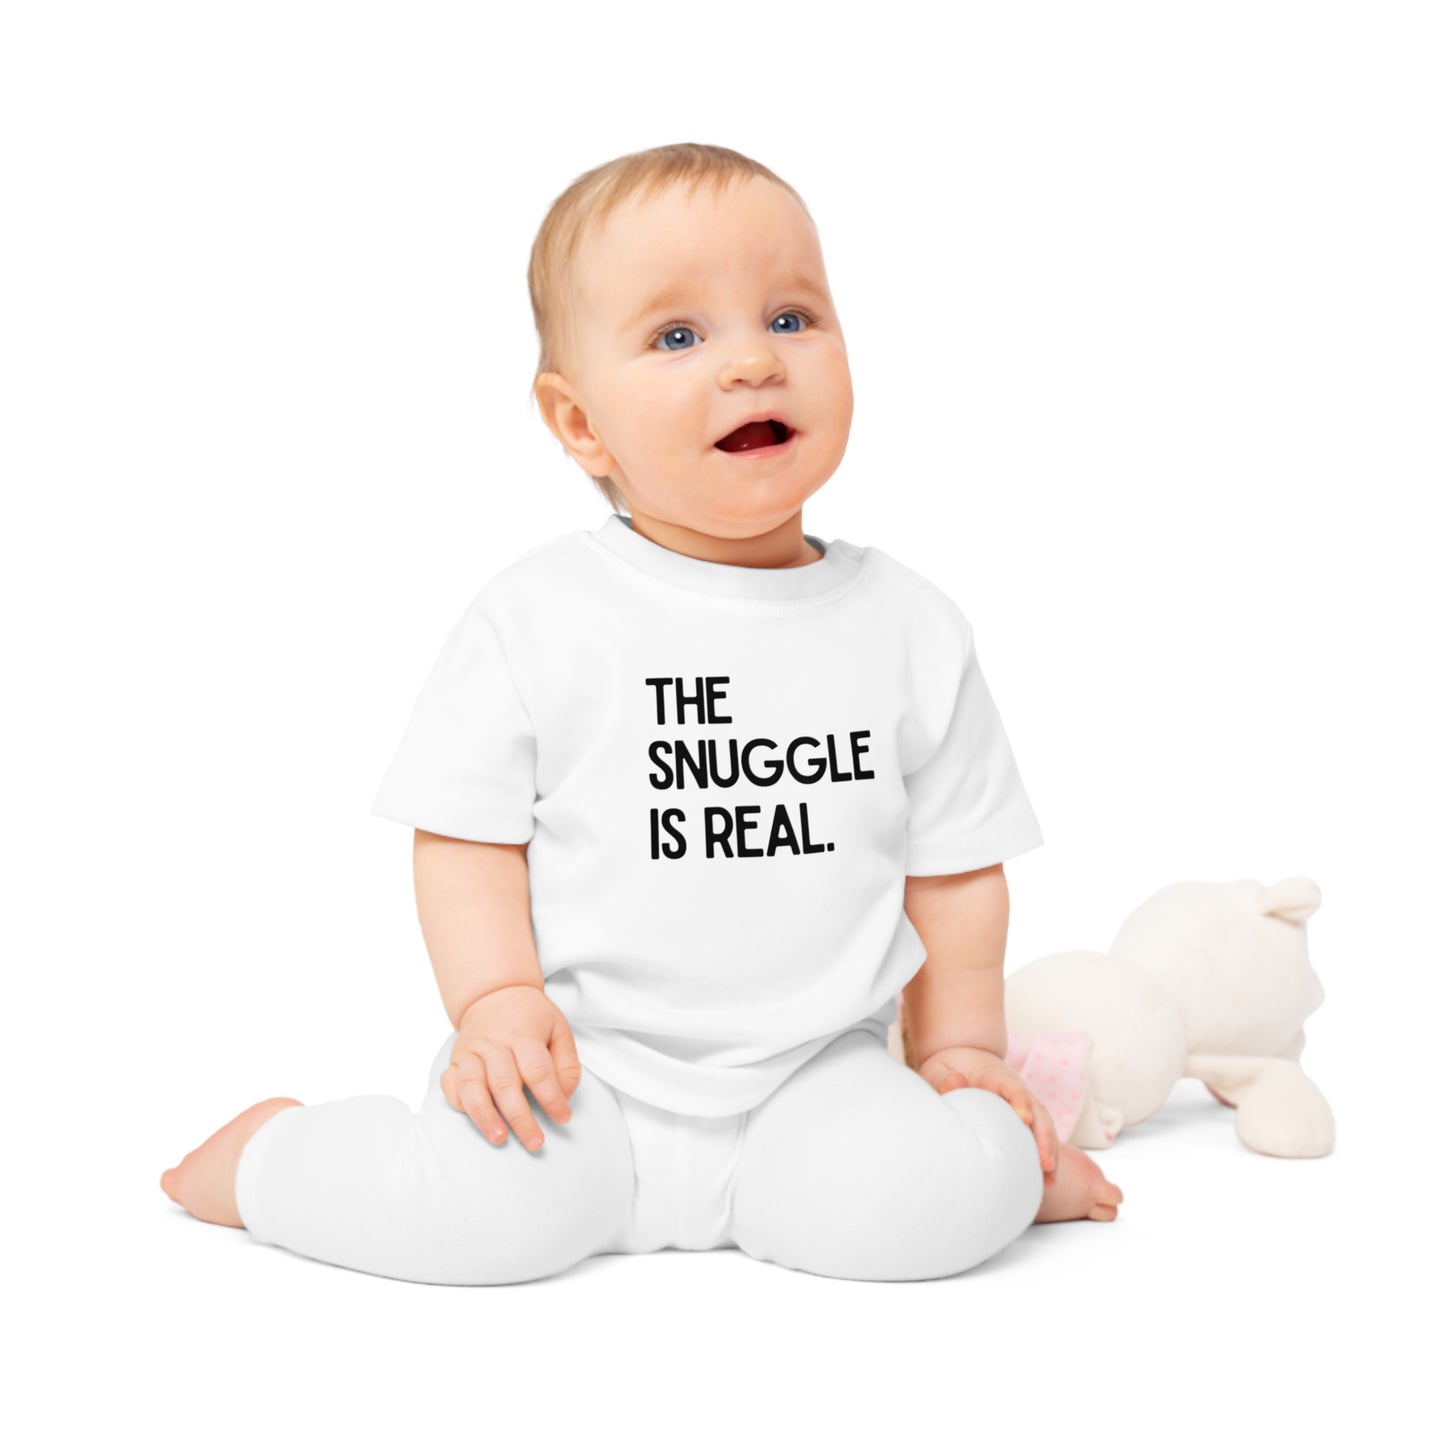 The snuggle is real - Baby T-Shirt